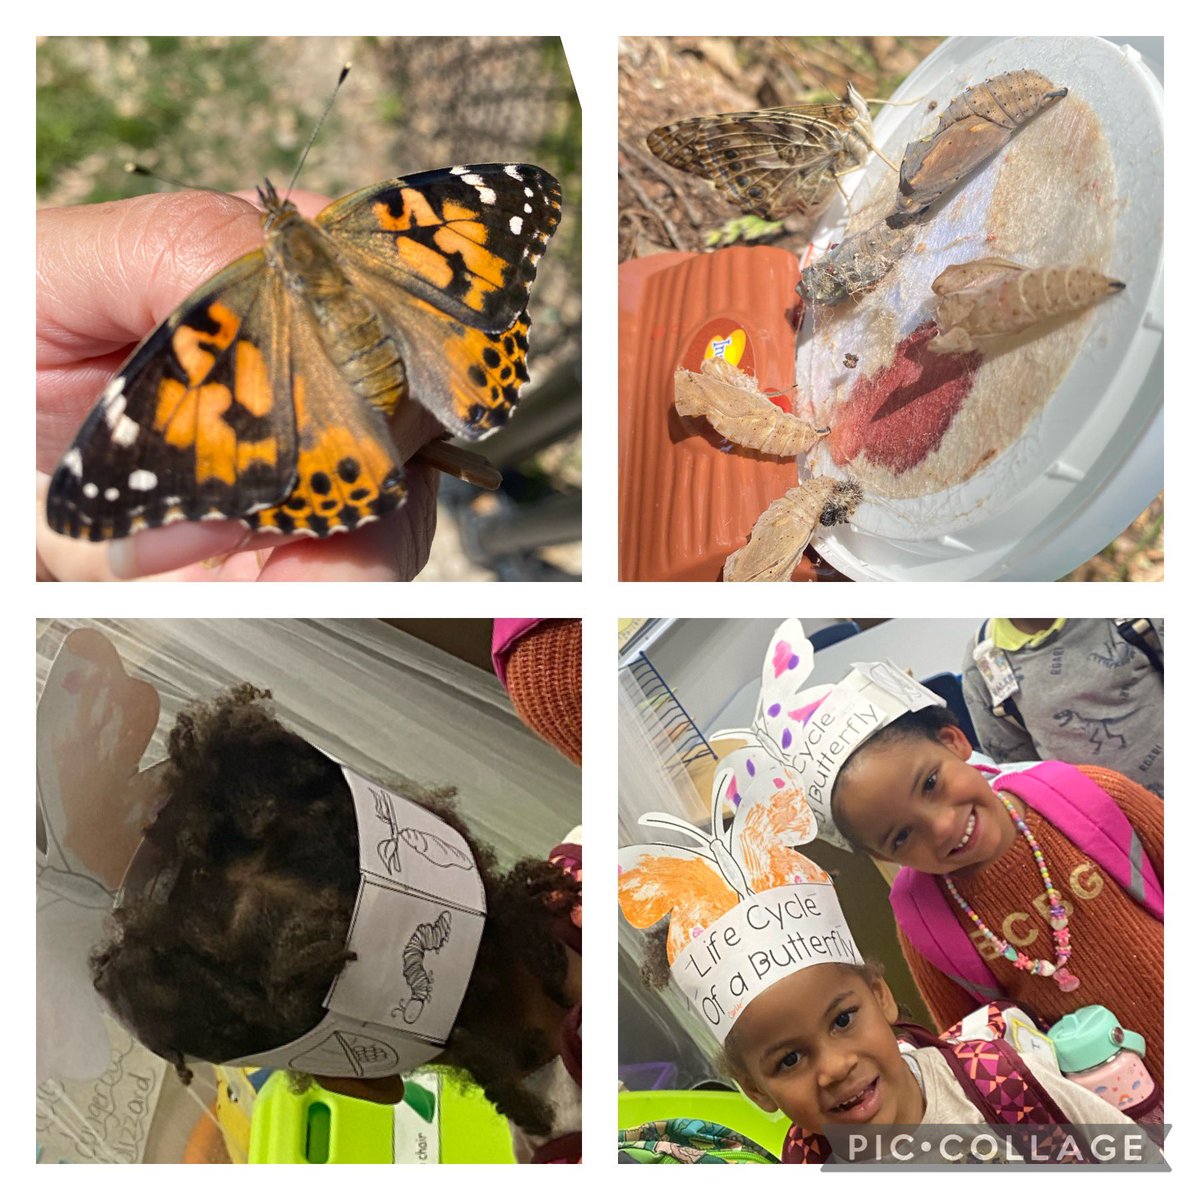 #RISD #Prek3 Had a fun Friday finishing our #FlyingInsect theme! We ate the 🦋 #lifecycle, made symmetrical 🦋 crowns with the life cycle, built 🌺 gardens for 🦋’s & released our 🦋’s! We are World Class🌎 @ForestLnAcademy 😄